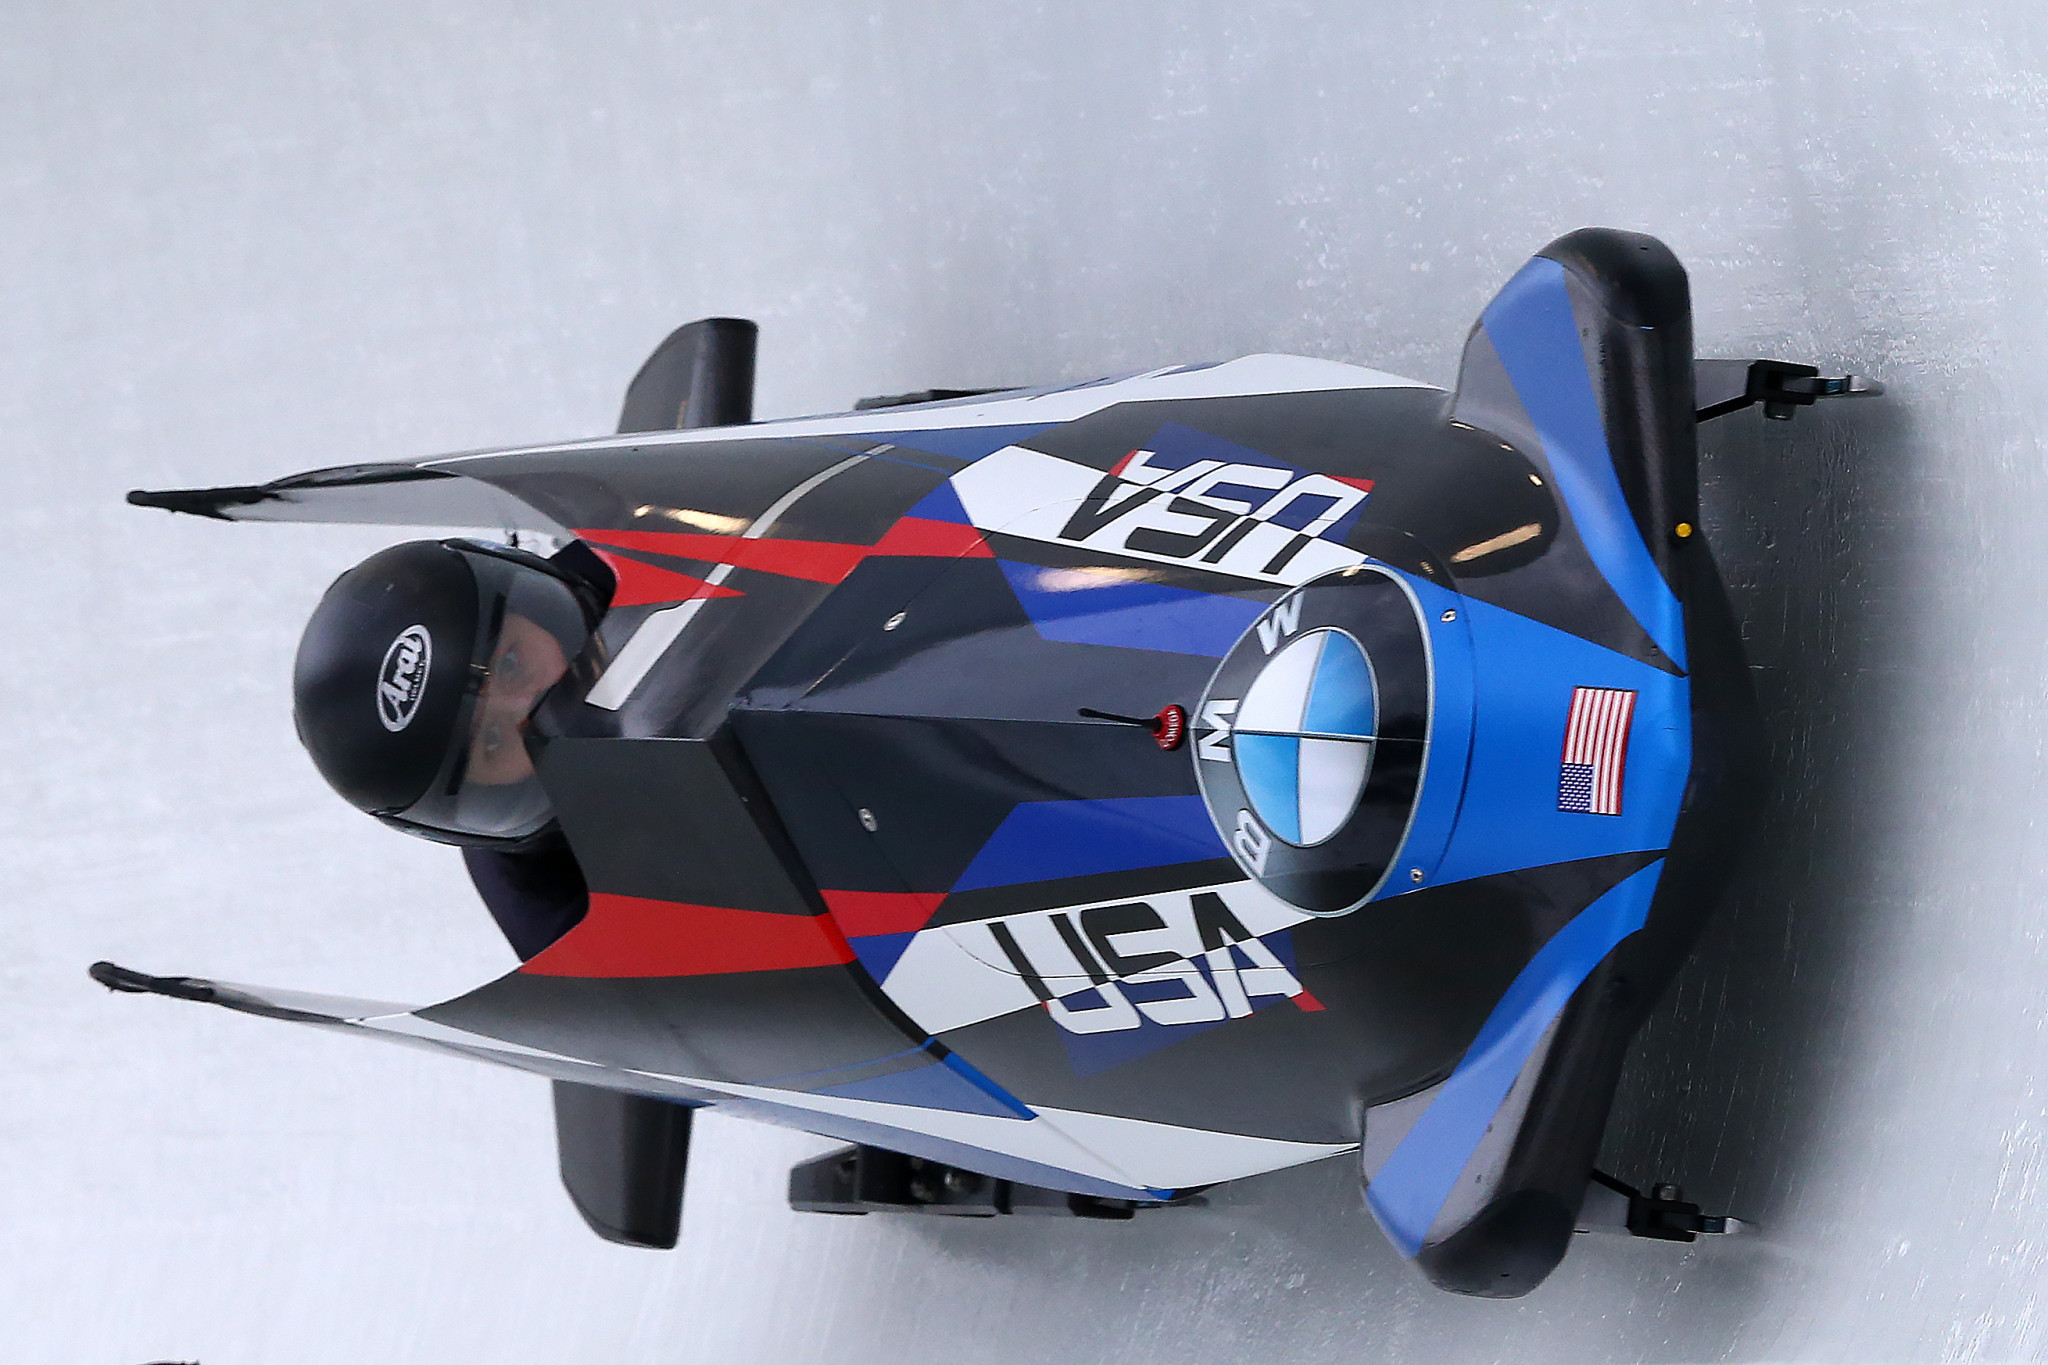 Nicole Vogt has announced her retirement from bobsleigh ©Getty Images